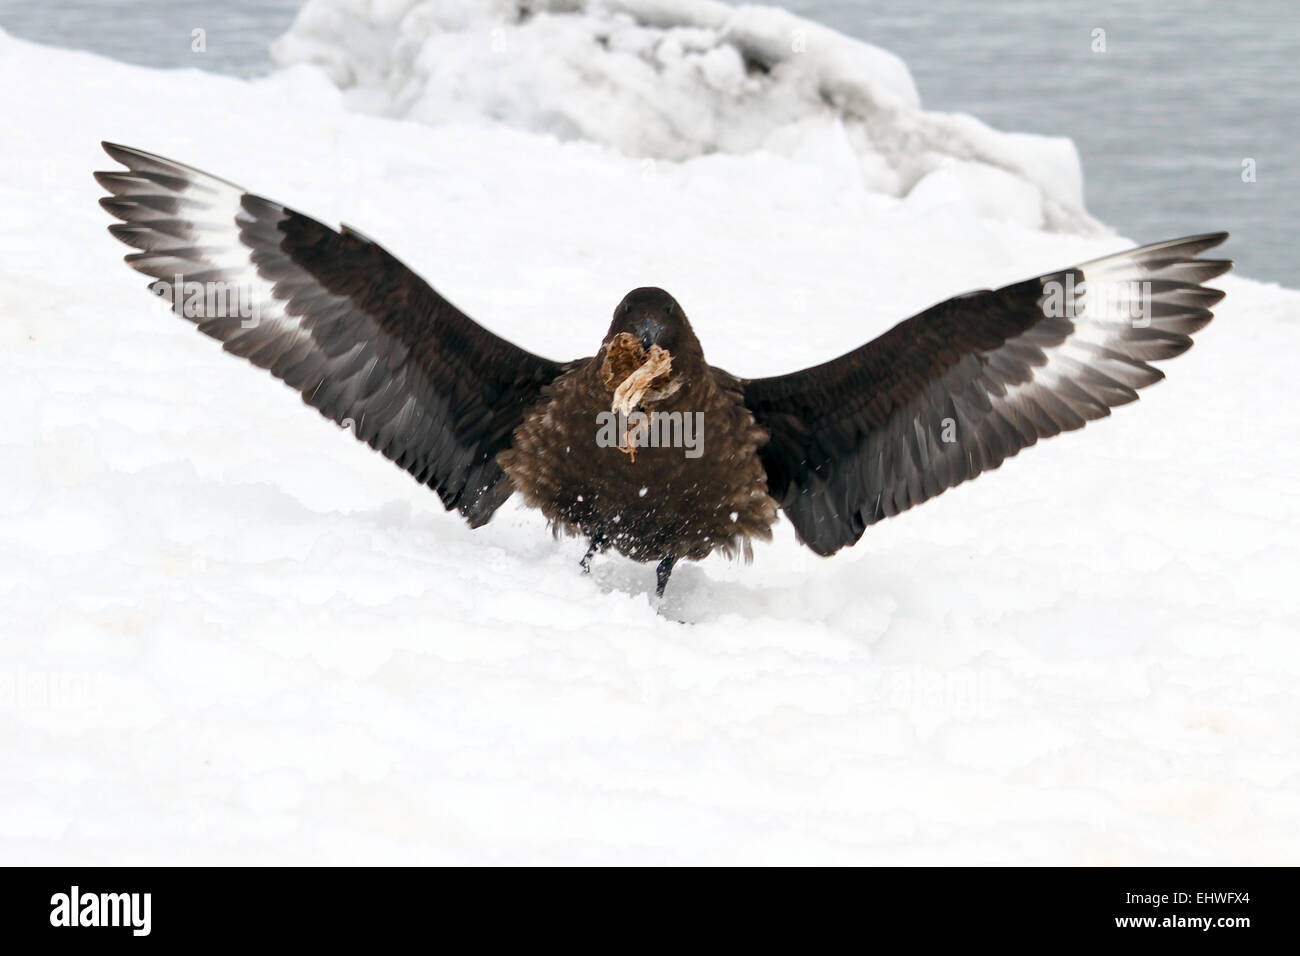 Southern giant petrel (Macronectes giganteus) with prey. This large bird is native to Antarctica and the southern hemisphere reg Stock Photo